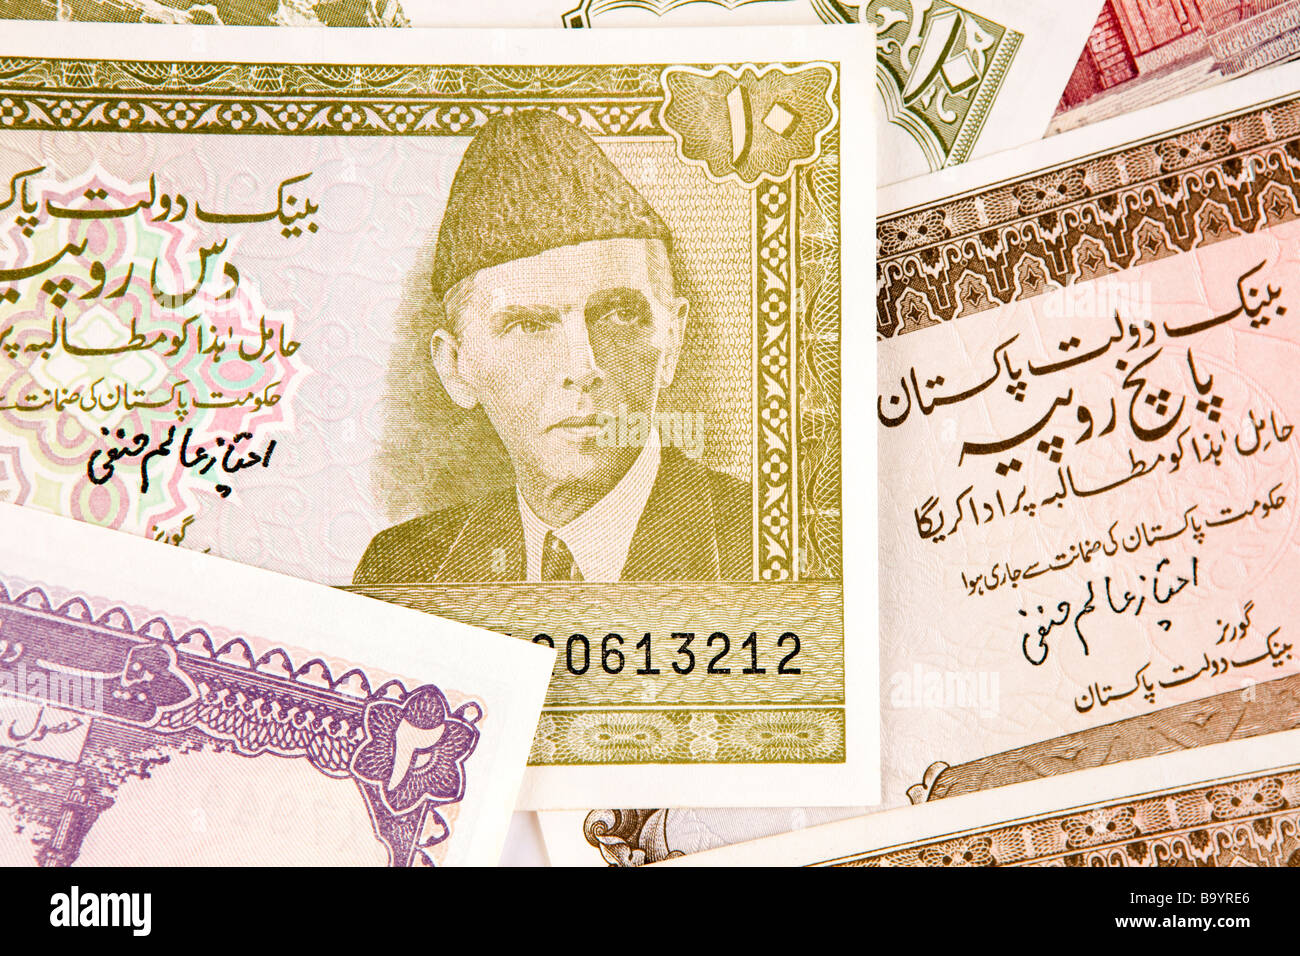 Money currency detail of Pakistani banknotes Stock Photo